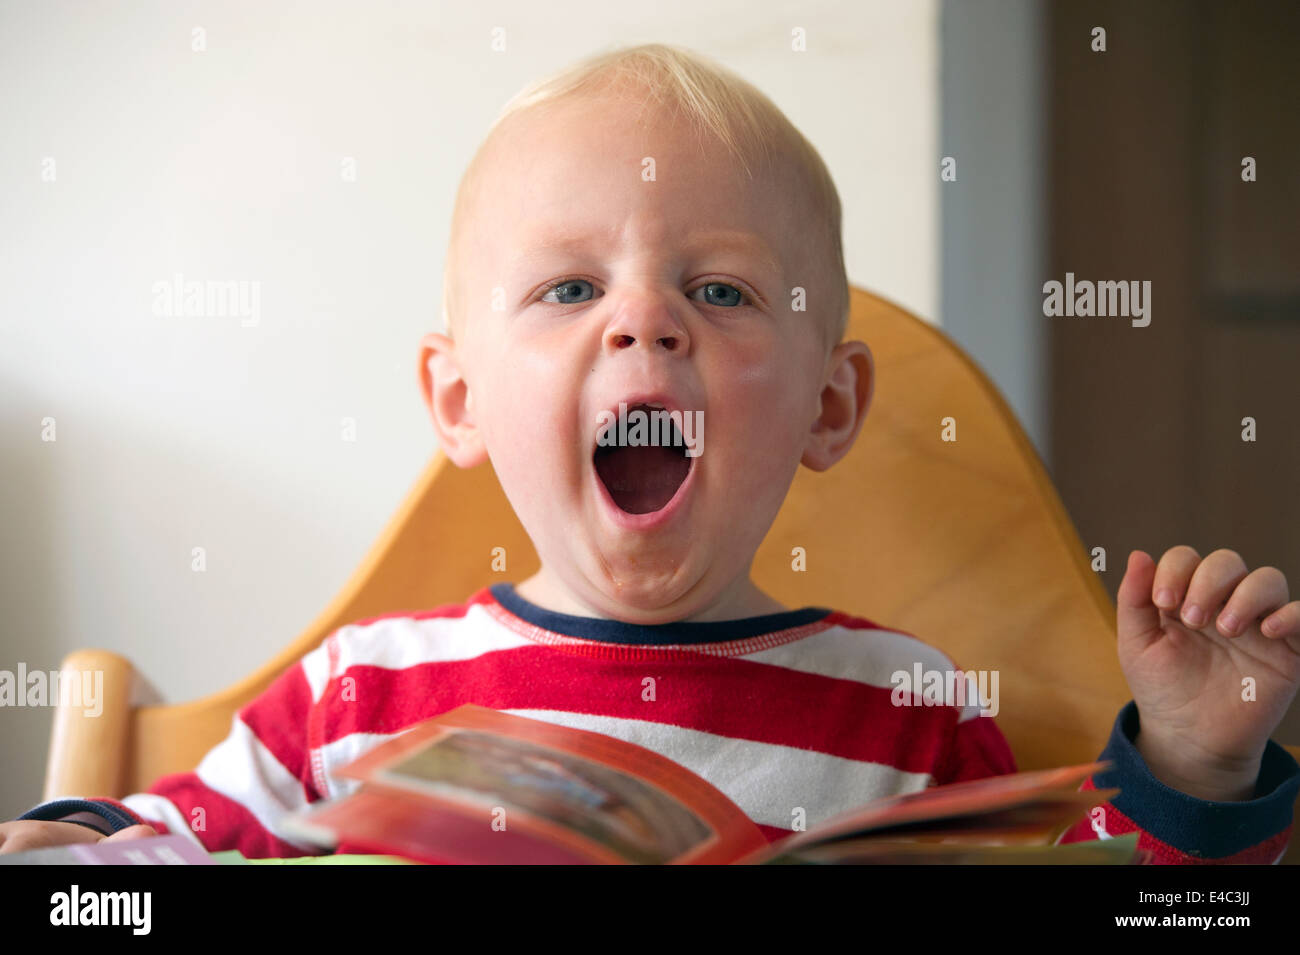 a young child yawning Stock Photo